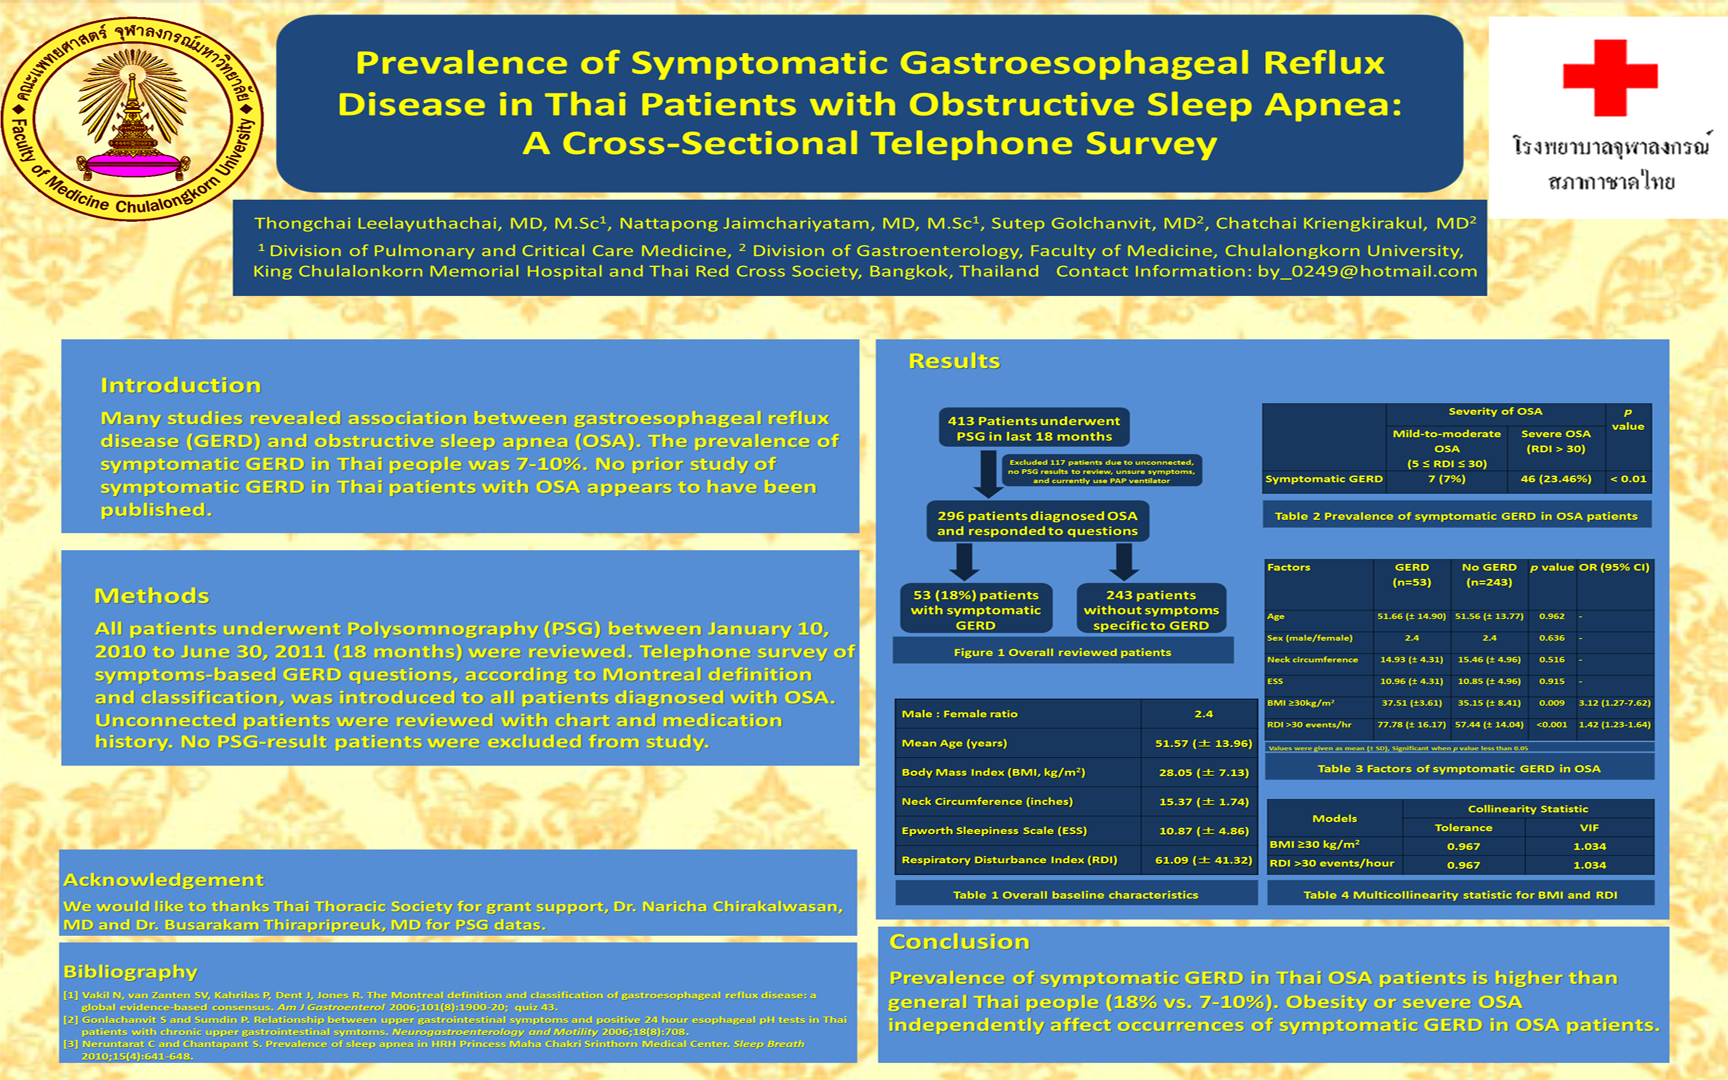 PREVALENCE OF SYMPTOMATIC GASTROESOPHAGEAL REFLUX DISEASE IN THAI PATIENTS WITH OBSTRUCTIVE SLEEP APNEA: A CROSS-SECTIONAL TELEPHONE SURVEY